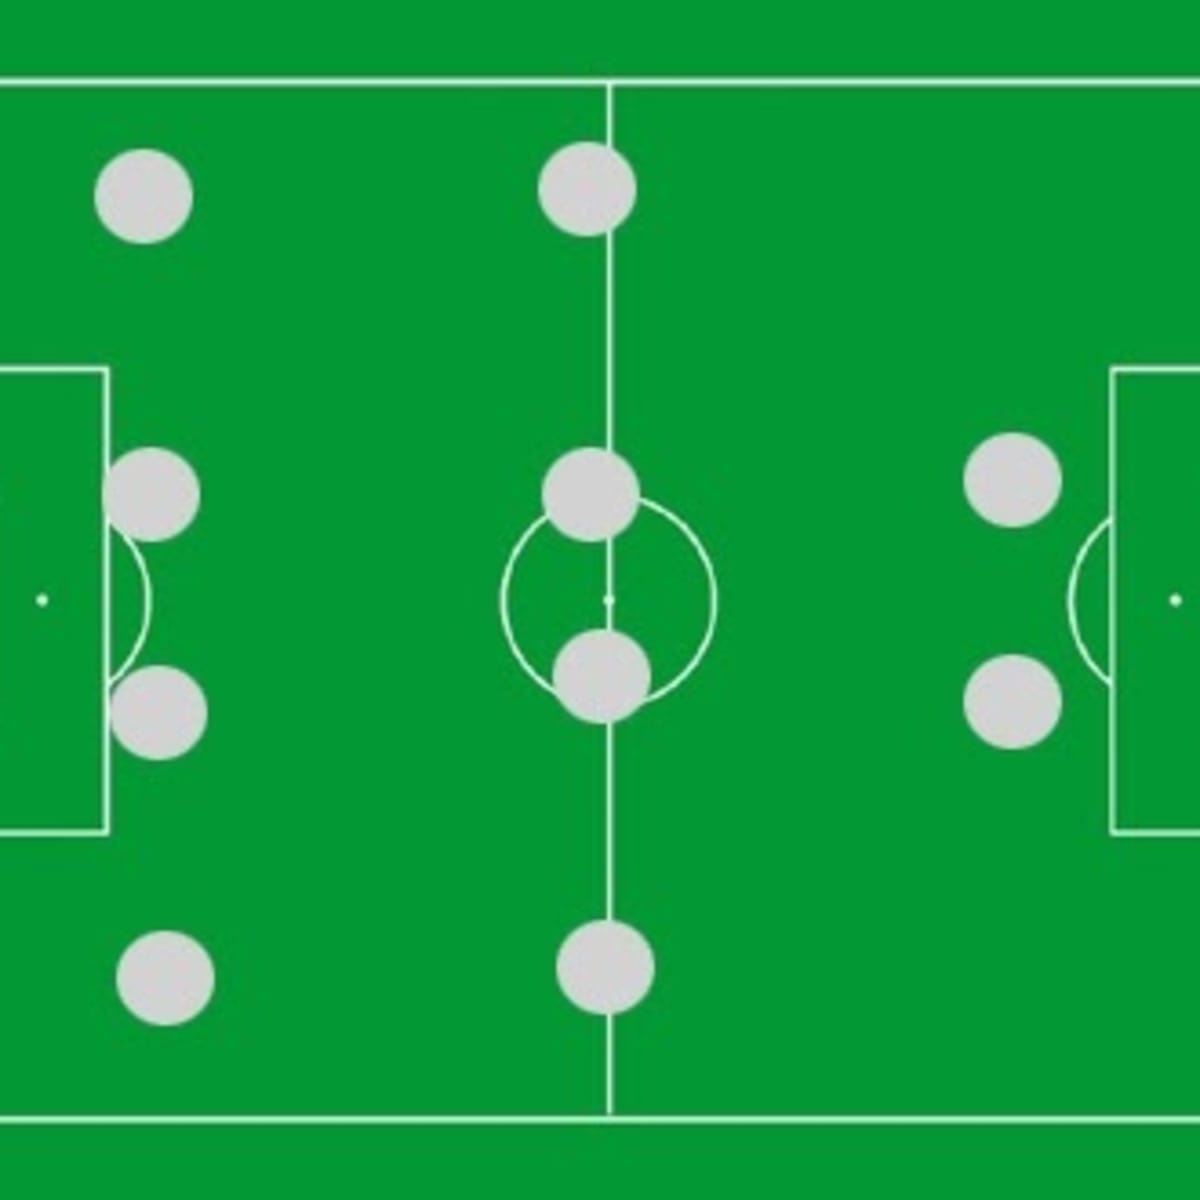 Coaches' Voice  The 4-4-2: football tactics explained